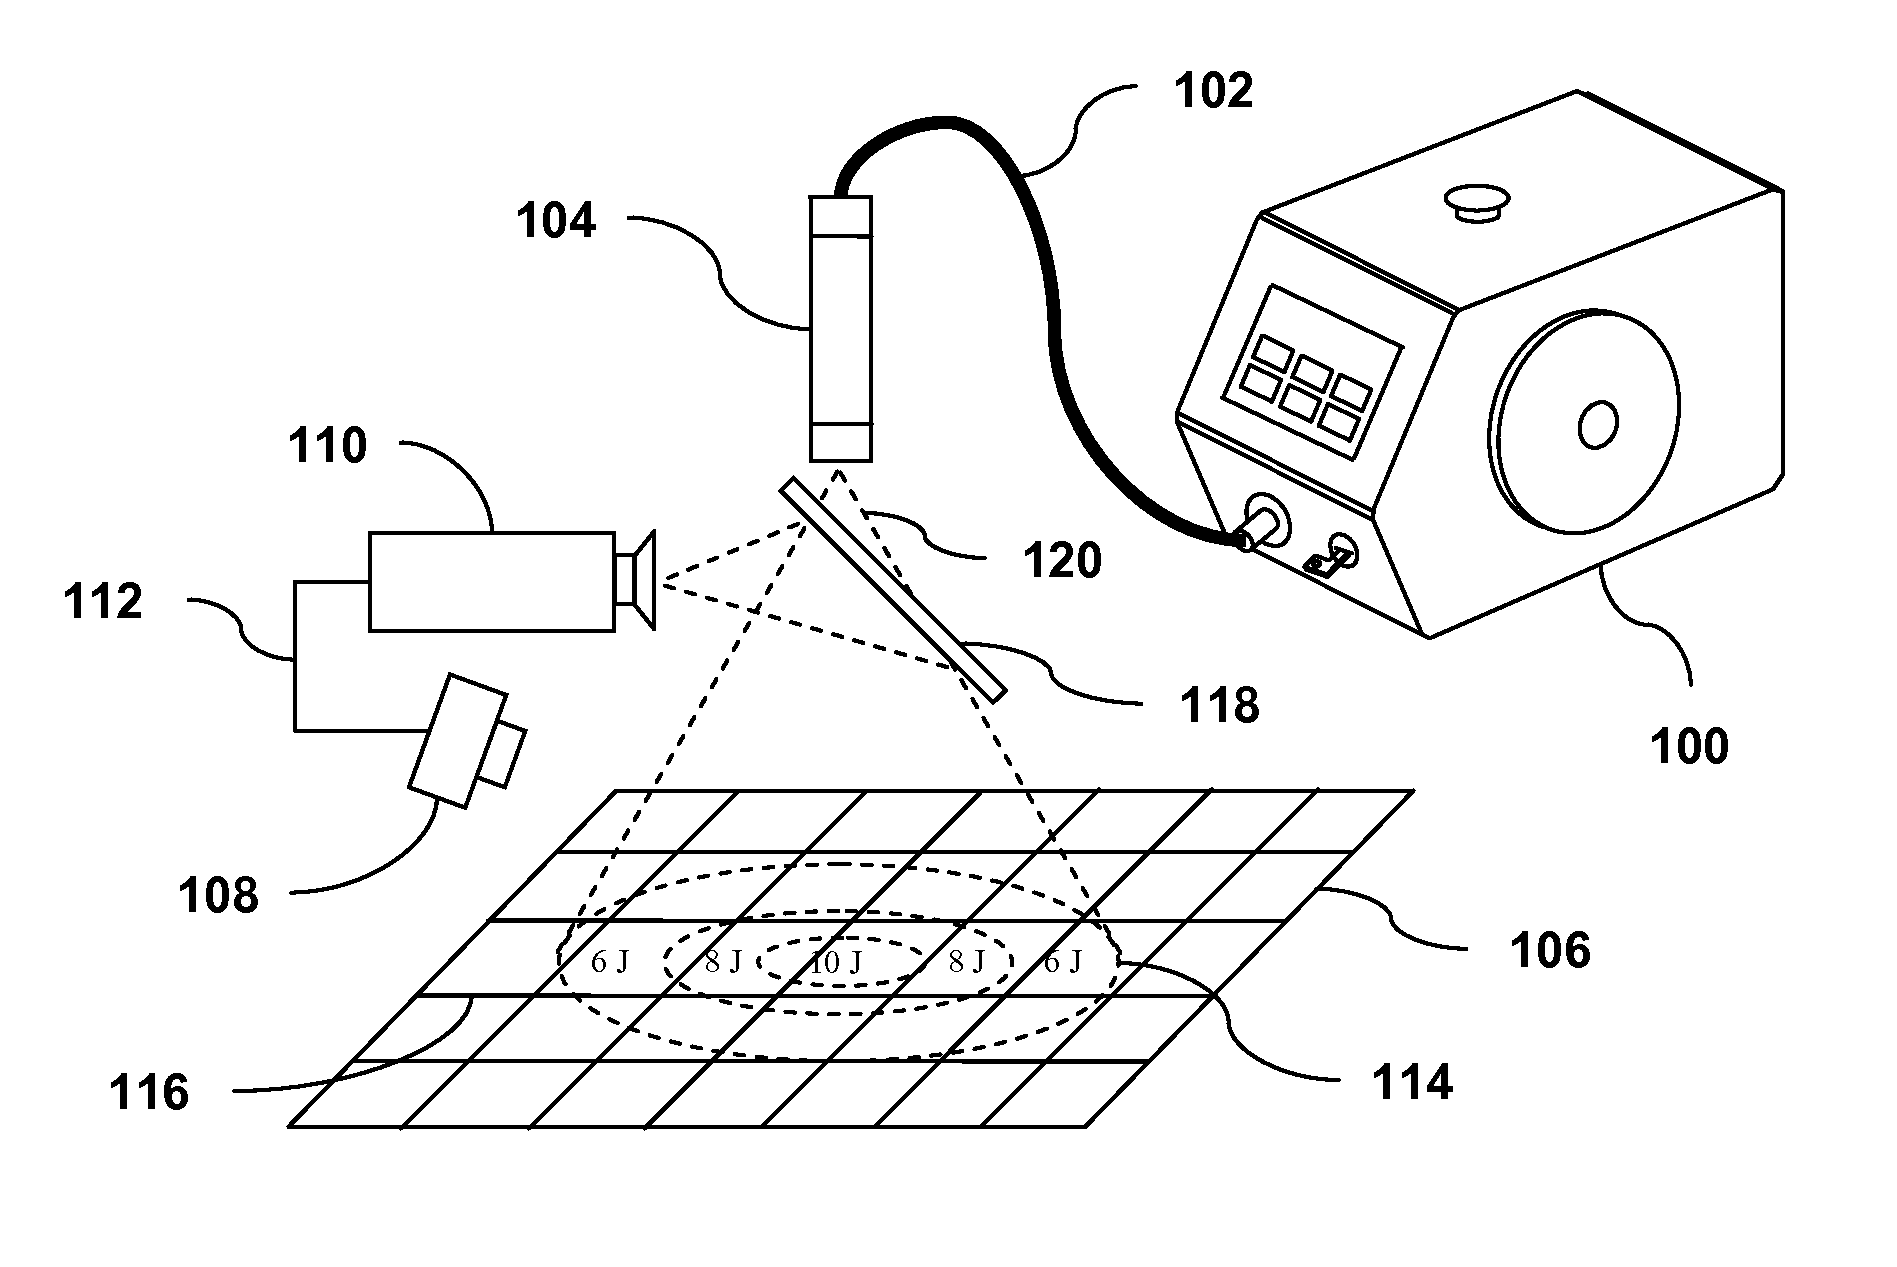 Precisely guided phototherapy apparatus